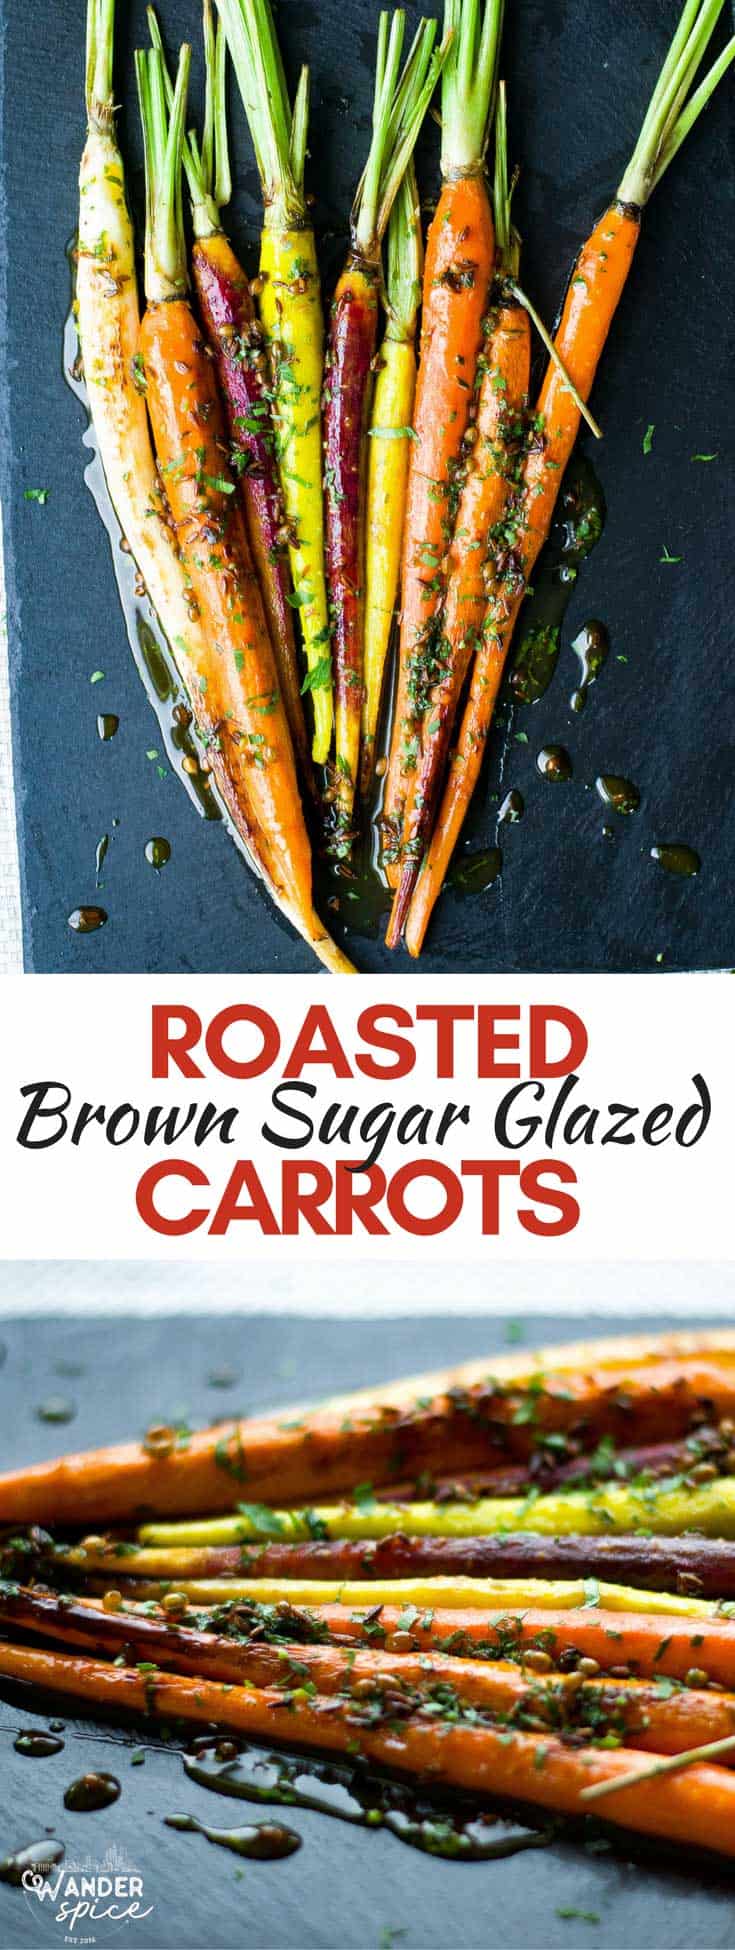 Roasted Glazed Brown Sugar Carrots Recipe. Our spiced brown sugar carrot glazed uses fresh rainbow carrots.